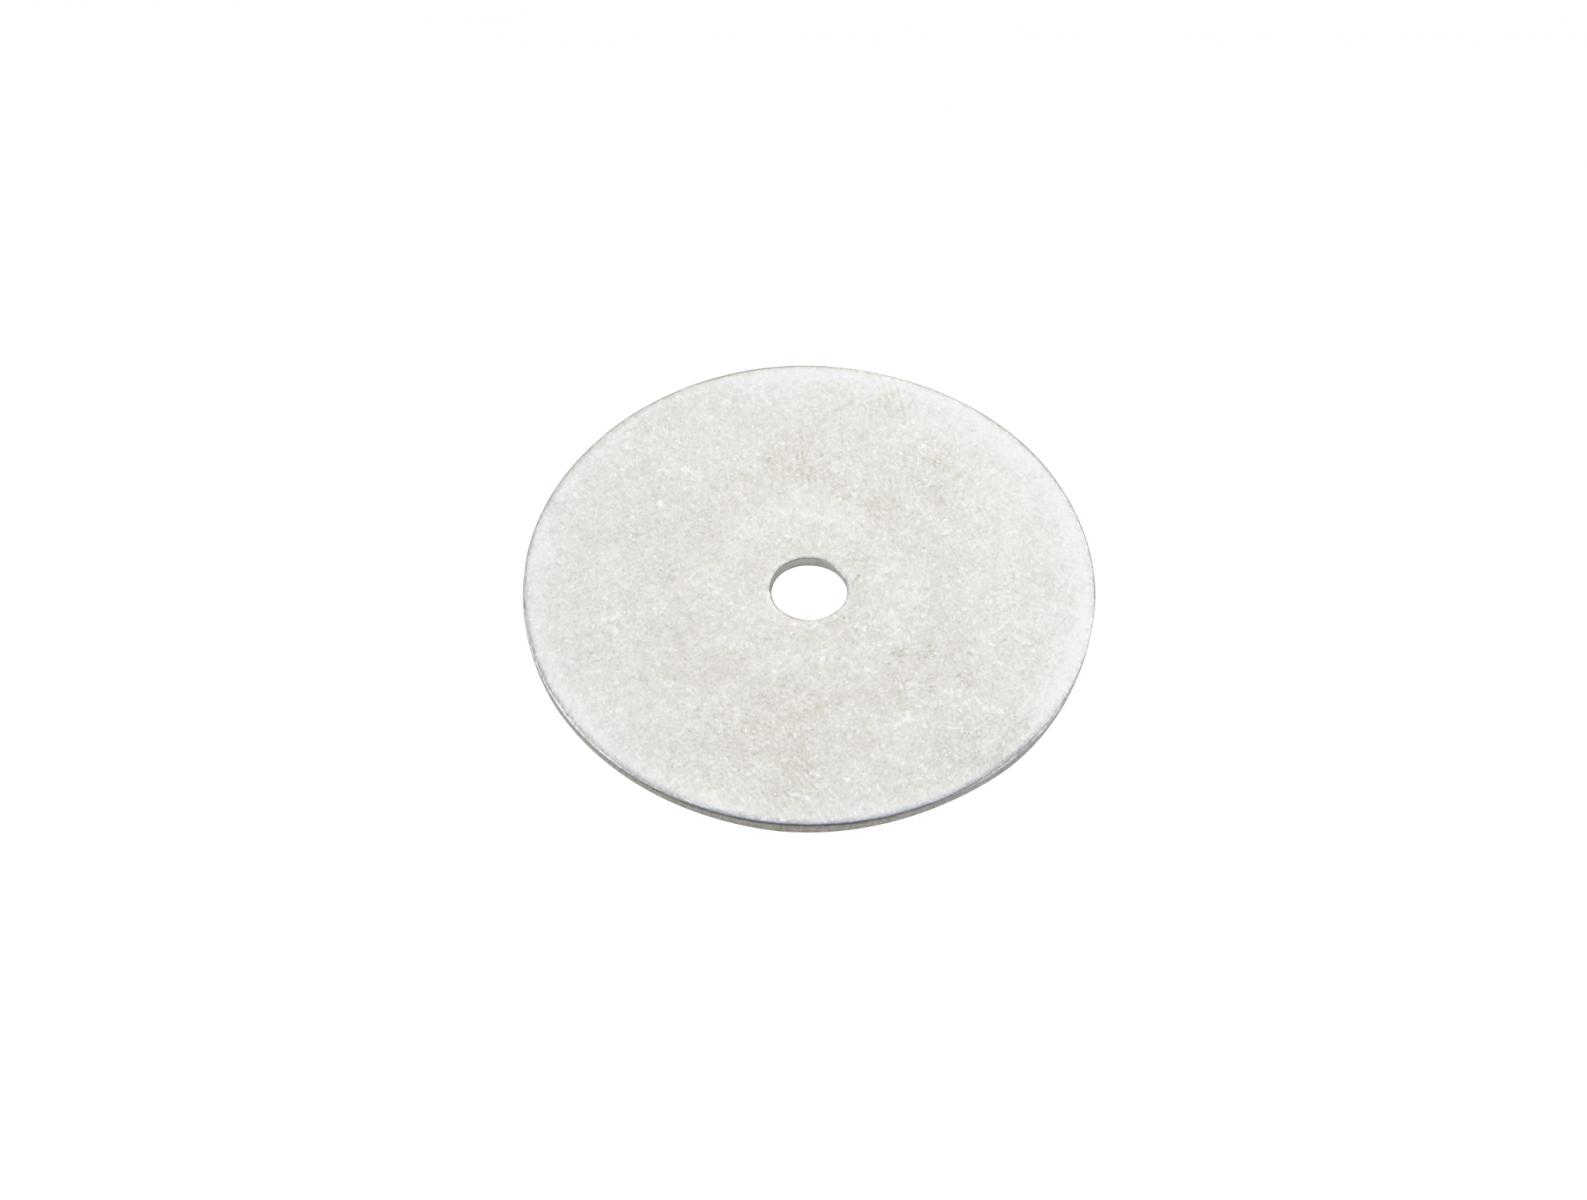 TapeTech® Cup Washer. Part number 050204